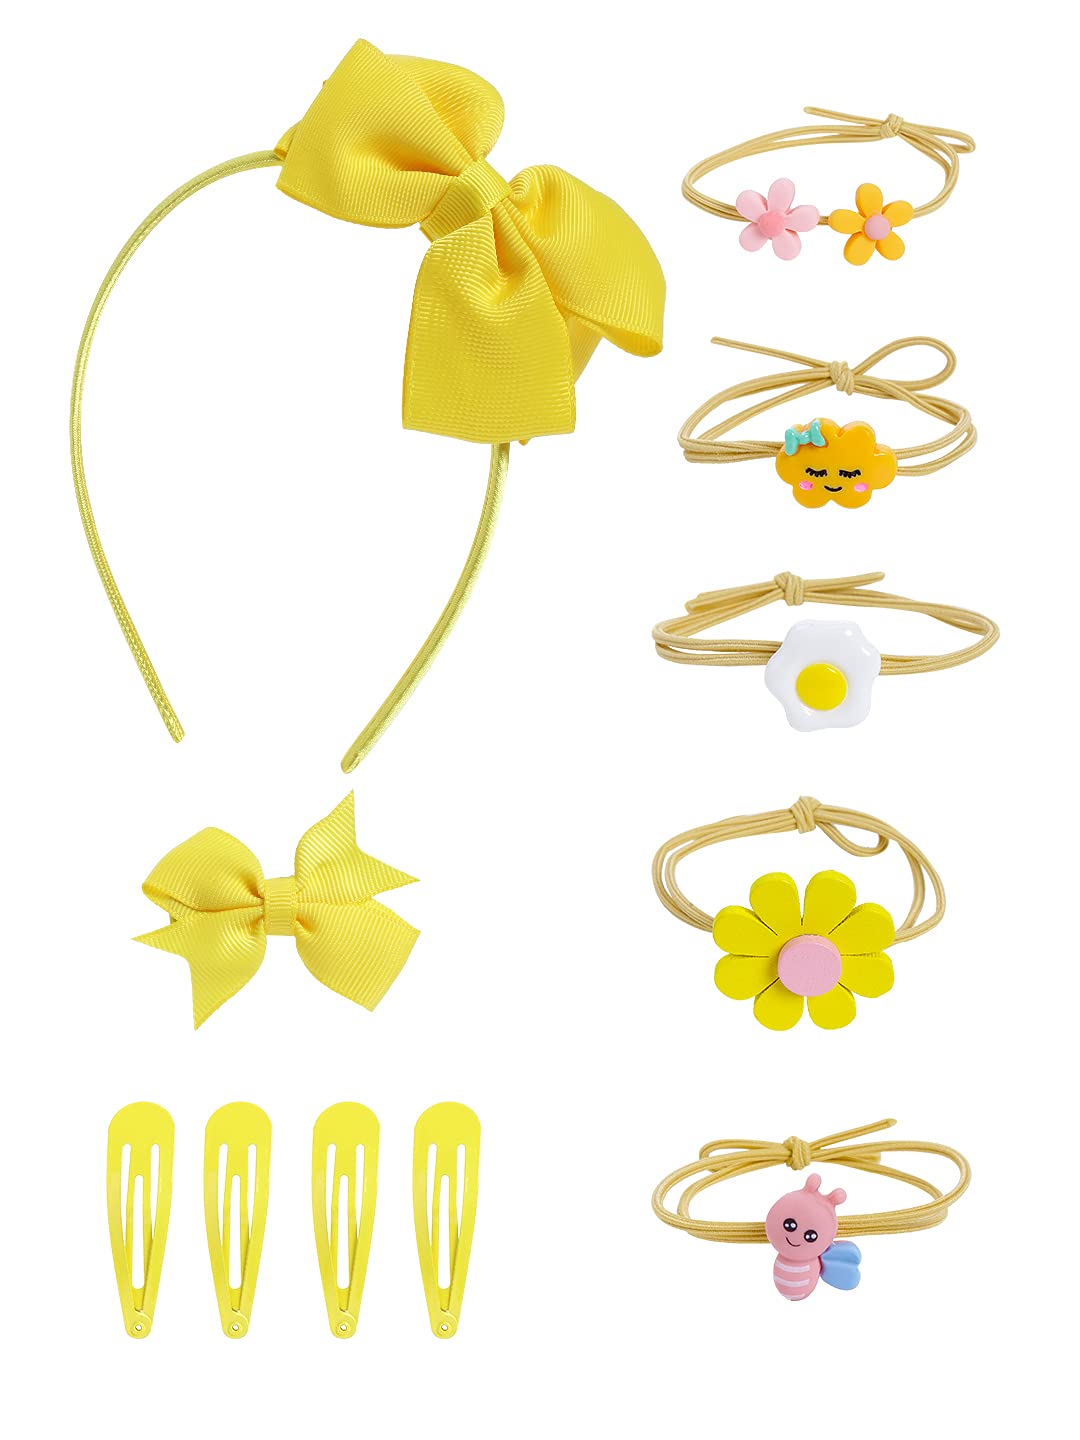 Melbees by Yellow Chimes Set of Hair Accessories Set of Bow Hair Band, 1 PCS Bow Hair Clips, 4 PCS Tic-Tac Hair Clips and 5 PCS Rubber Bands Pony Holders for Girls and Kids, Meduim (YCHASET-KD001-YL)